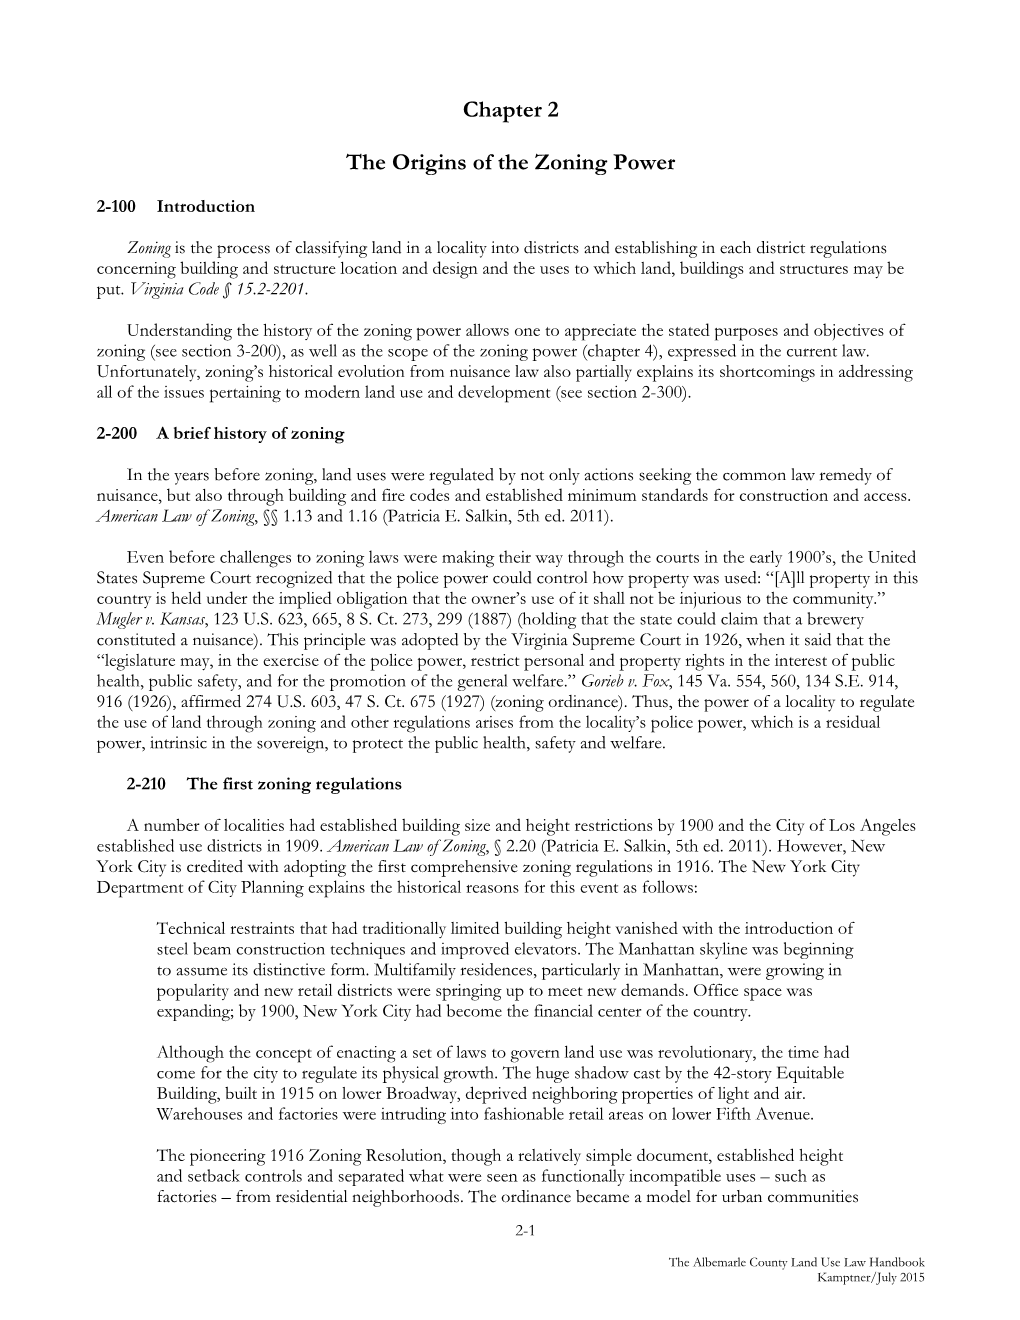 Chapter 2 the Origins of the Zoning Power